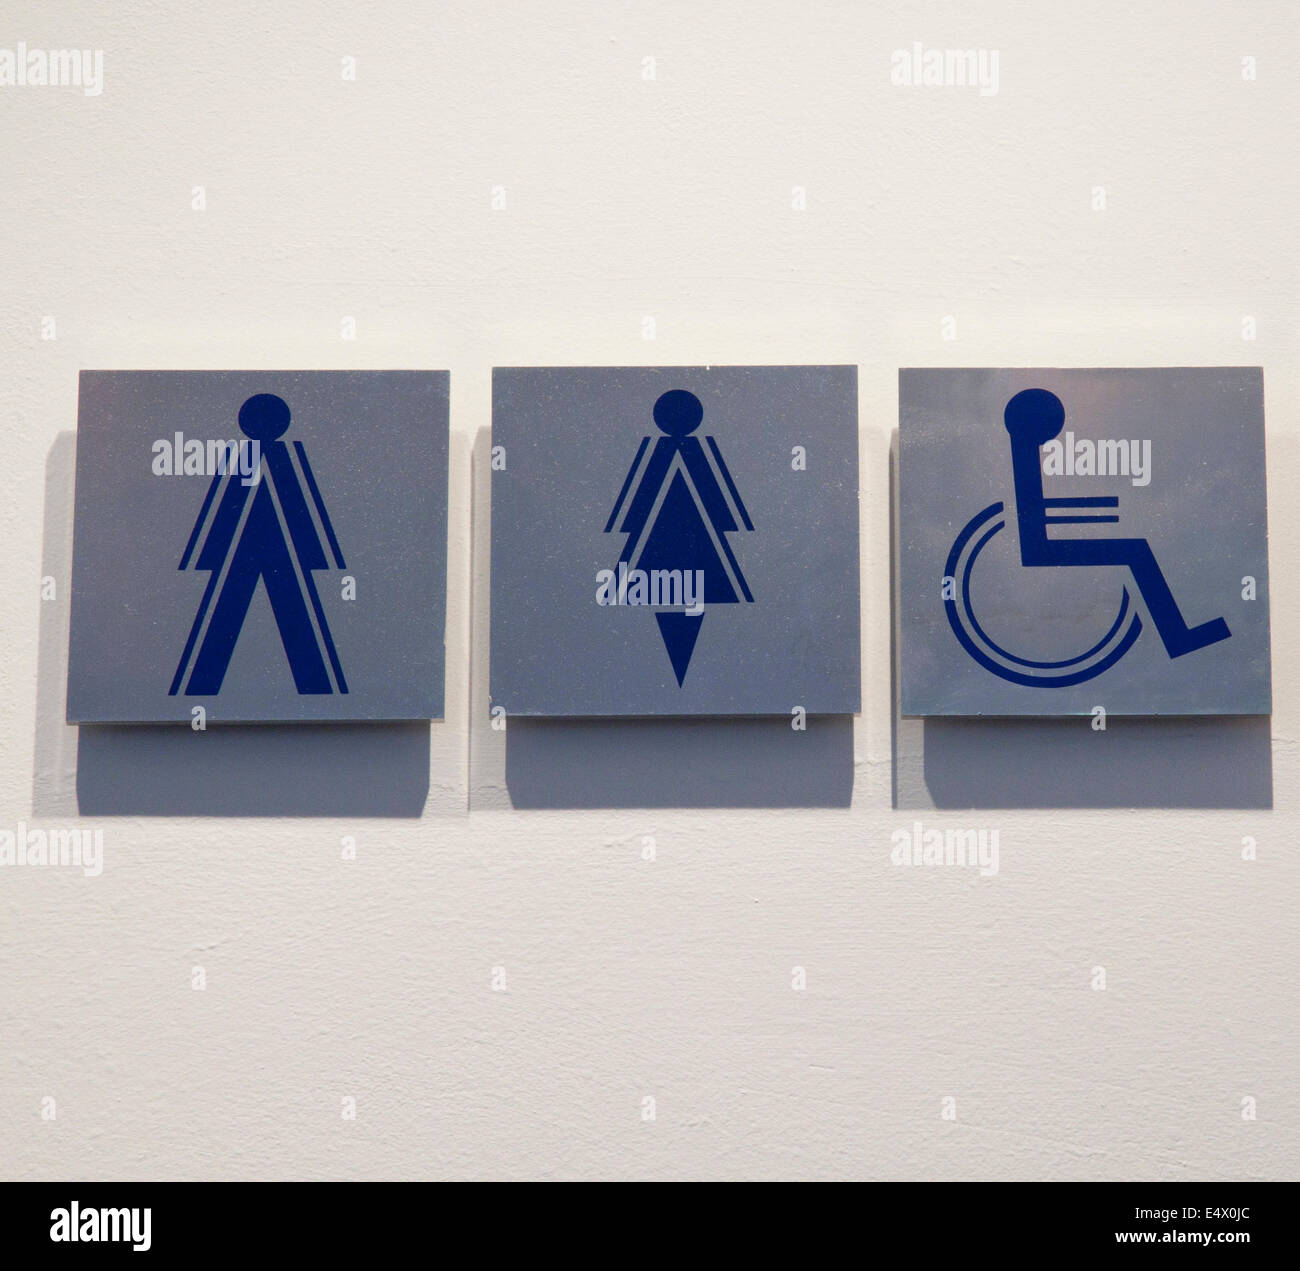 Toilet signs for men ladies and disabled people. Stock Photo